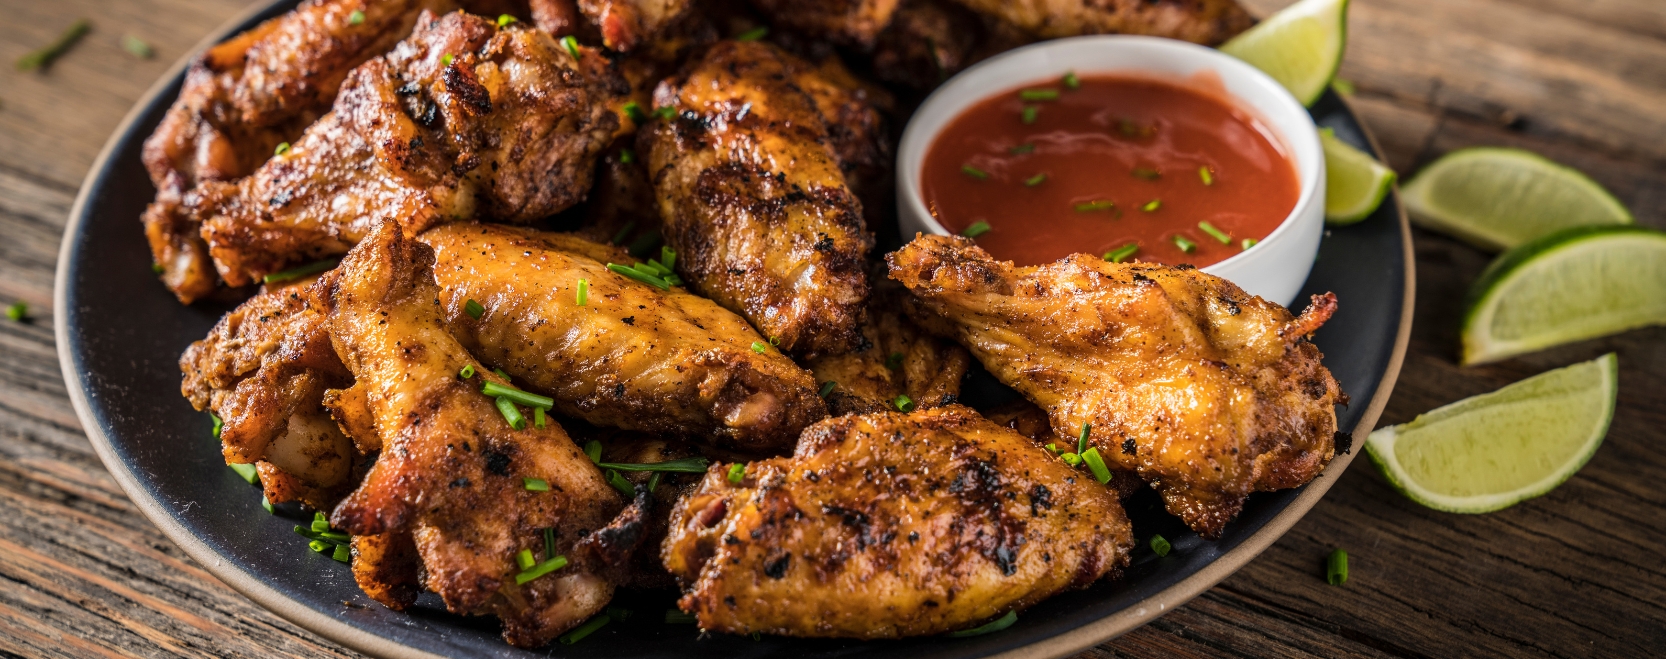 Roasted Tequila and Lime Chicken Wings